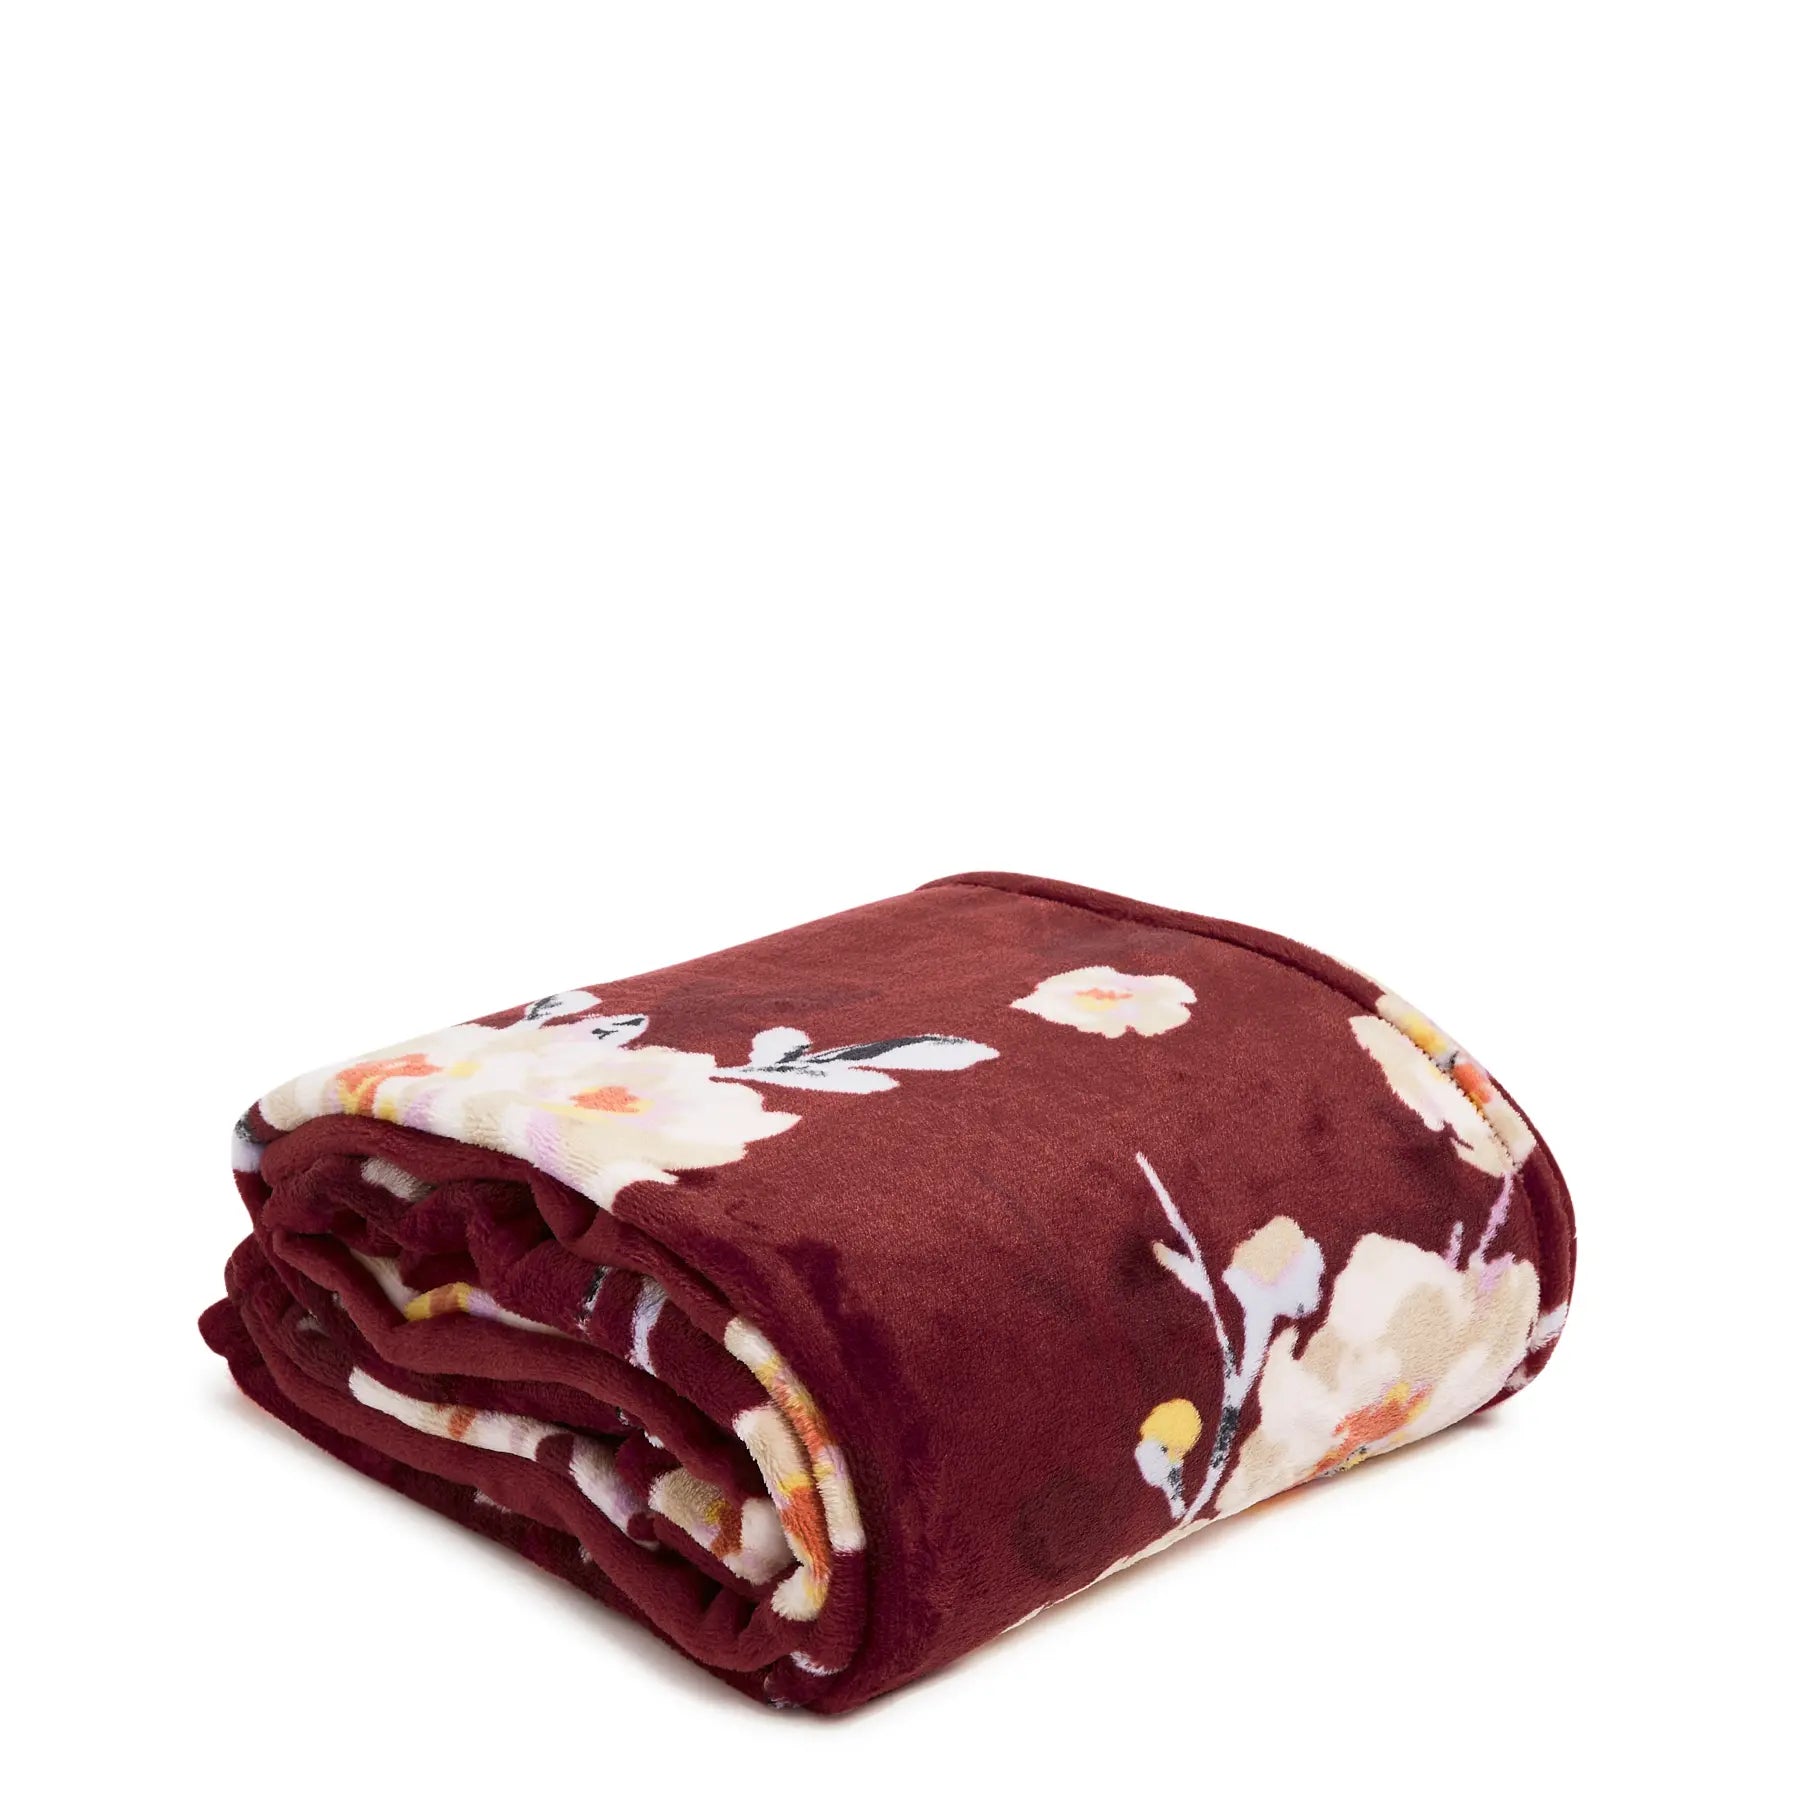 Vera Bradley Plush Throw Blanket in Blooms and Branches.